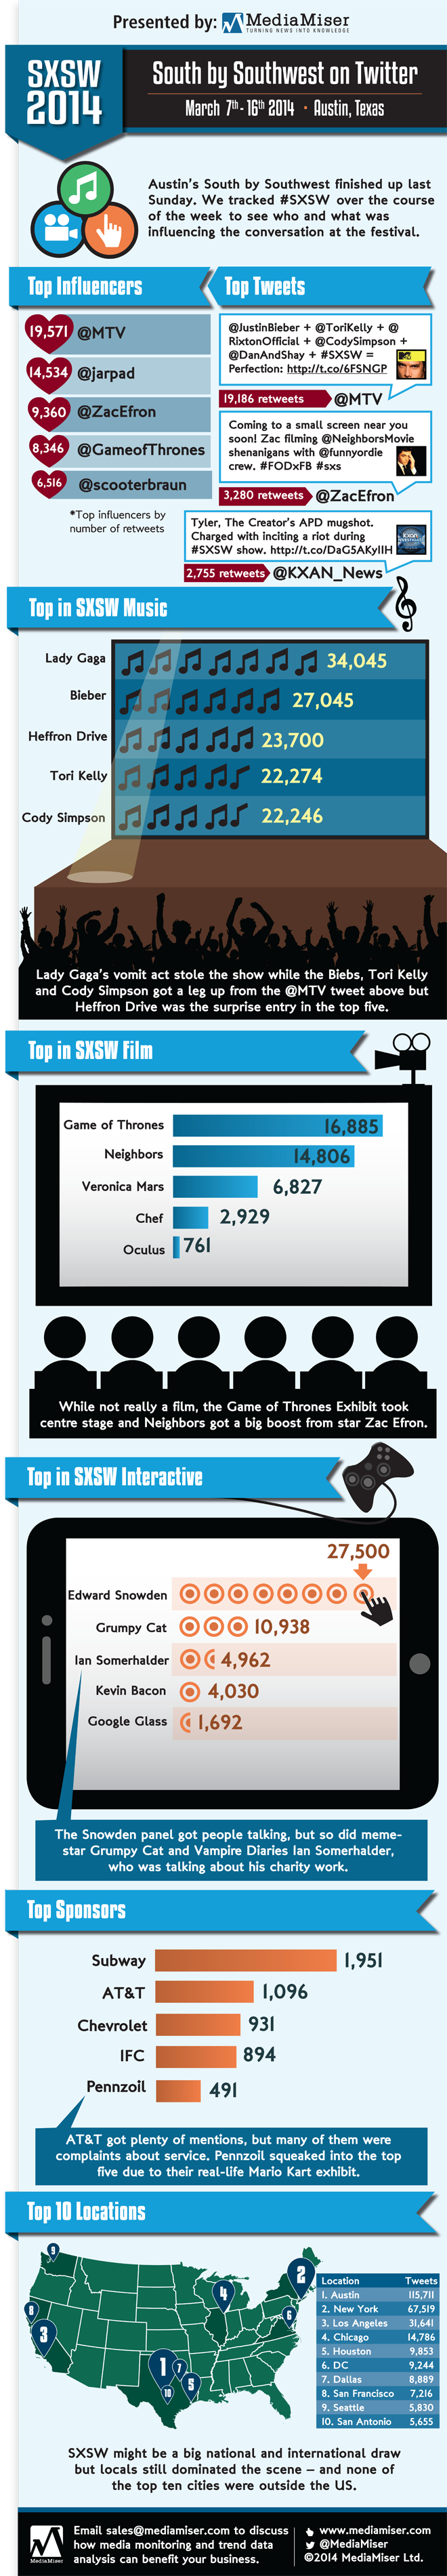 South by Southwest on Twitter